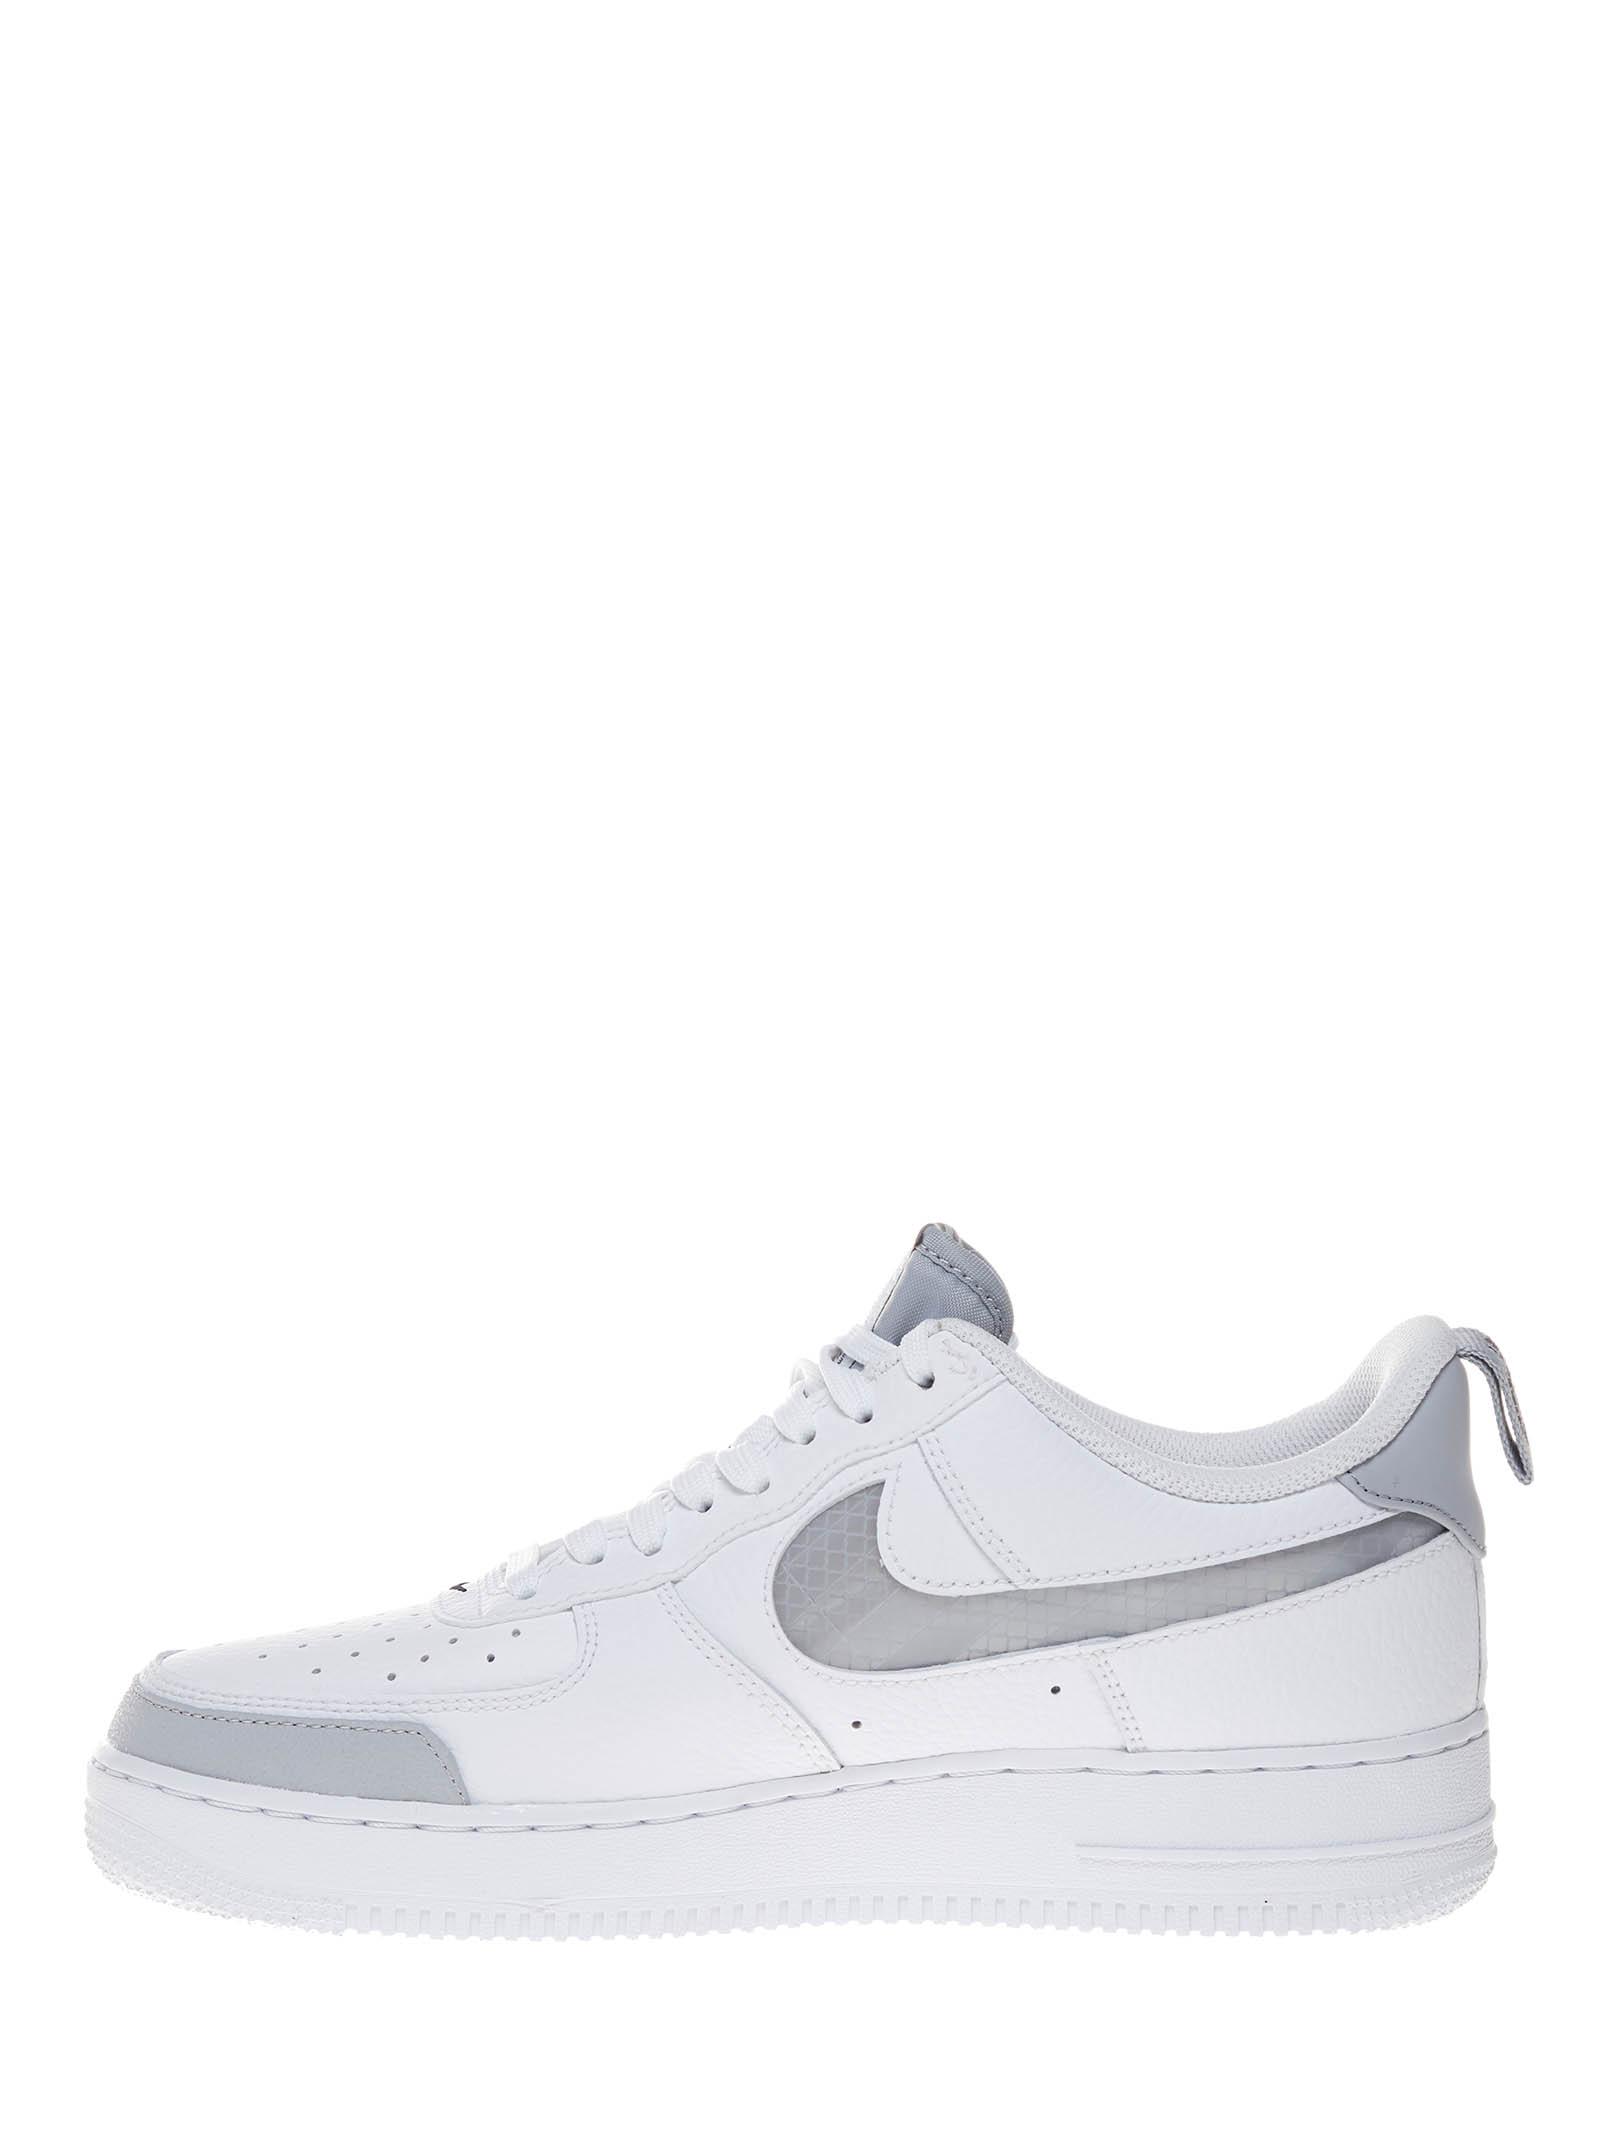 Nike Air Force 1 Low Reflective Swoosh for Sale